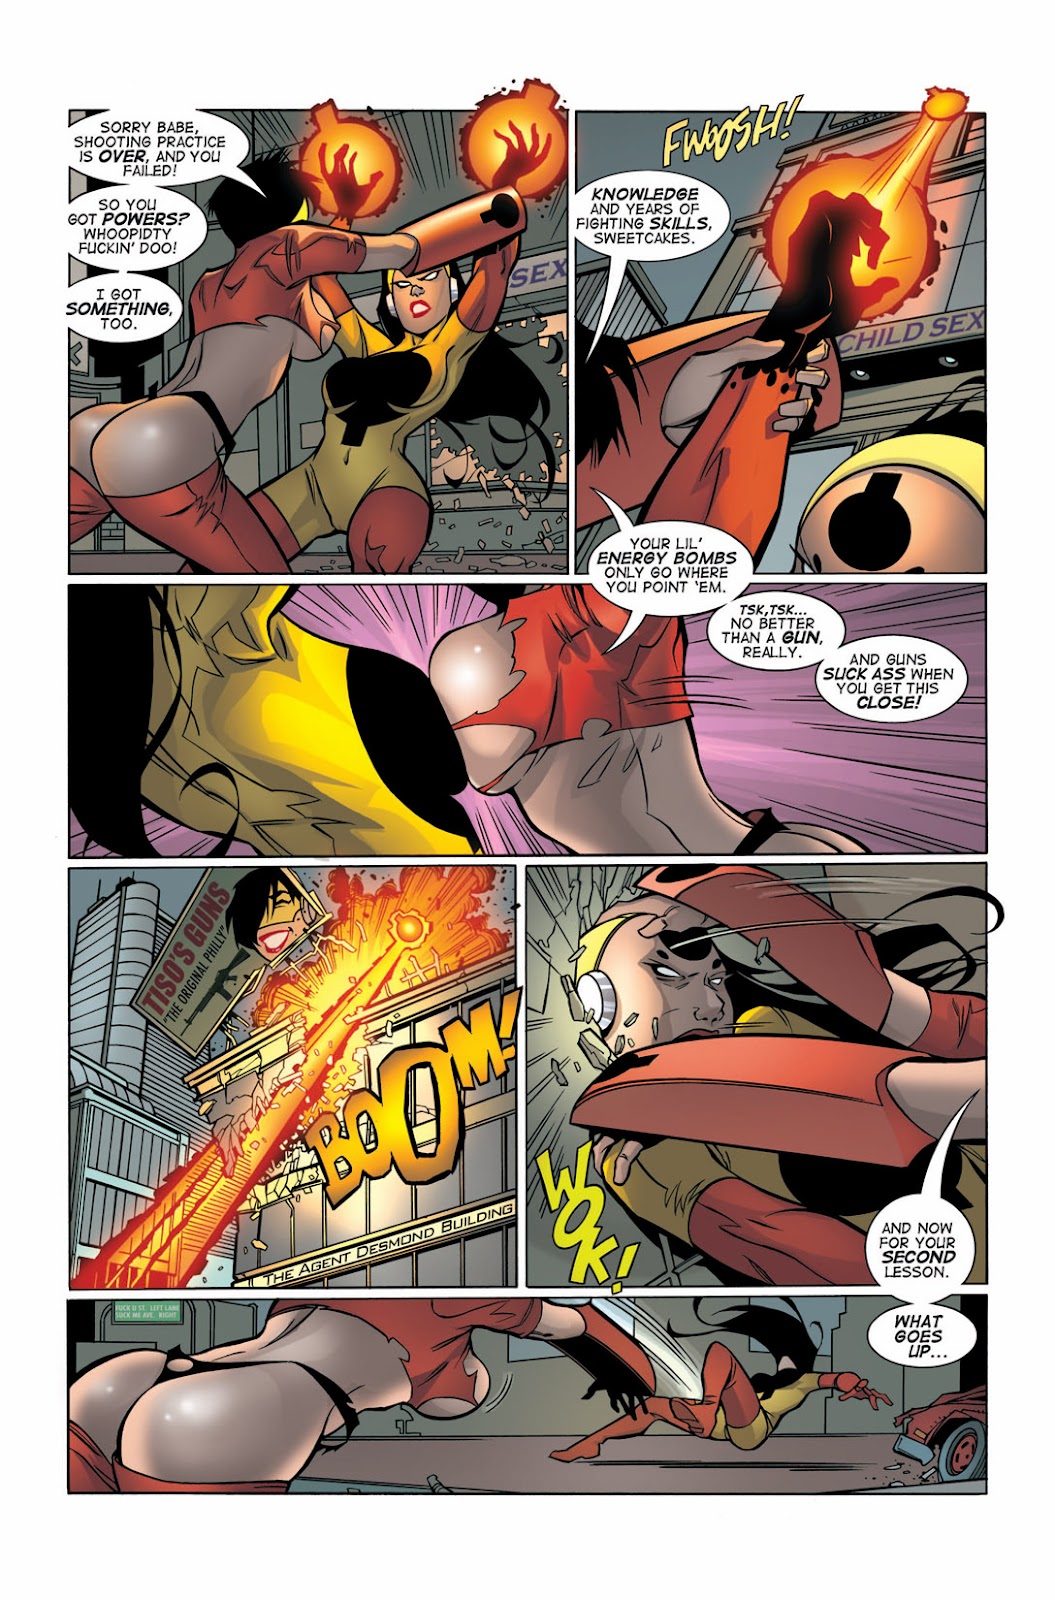 Bomb Queen III: The Good, The Bad & The Lovely issue 4 - Page 15